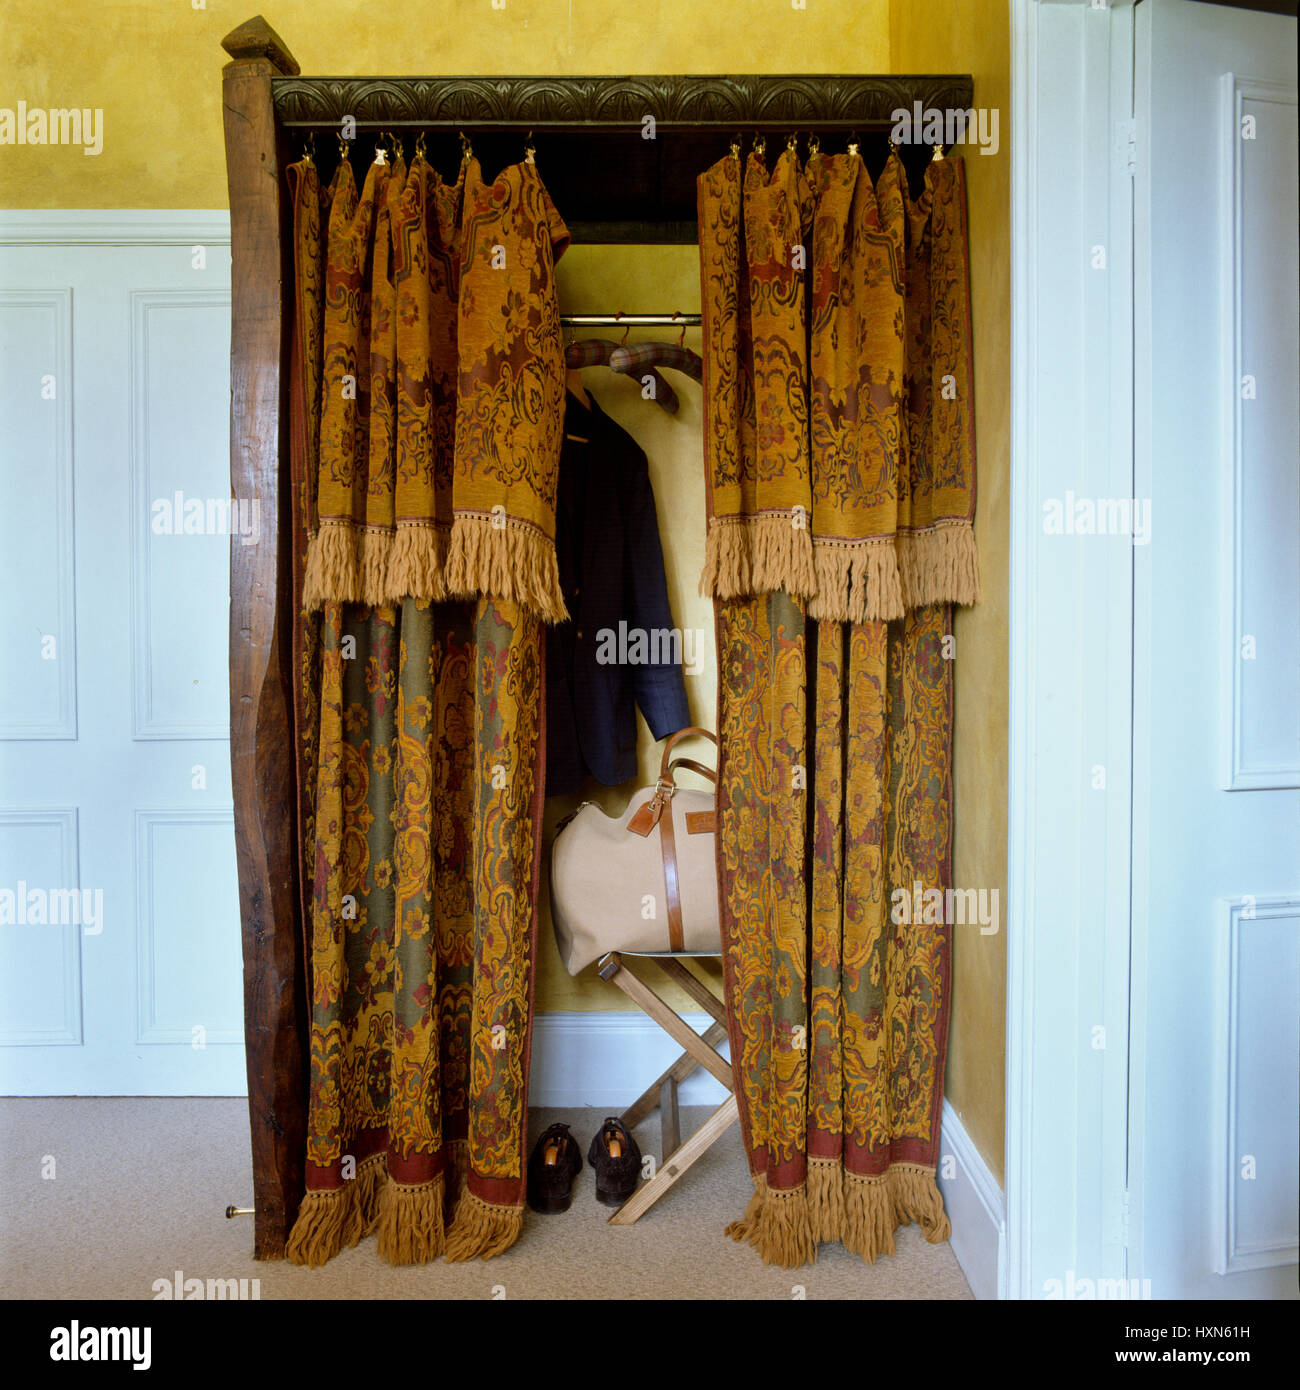 Wardrobe with patterned curtains. Stock Photo